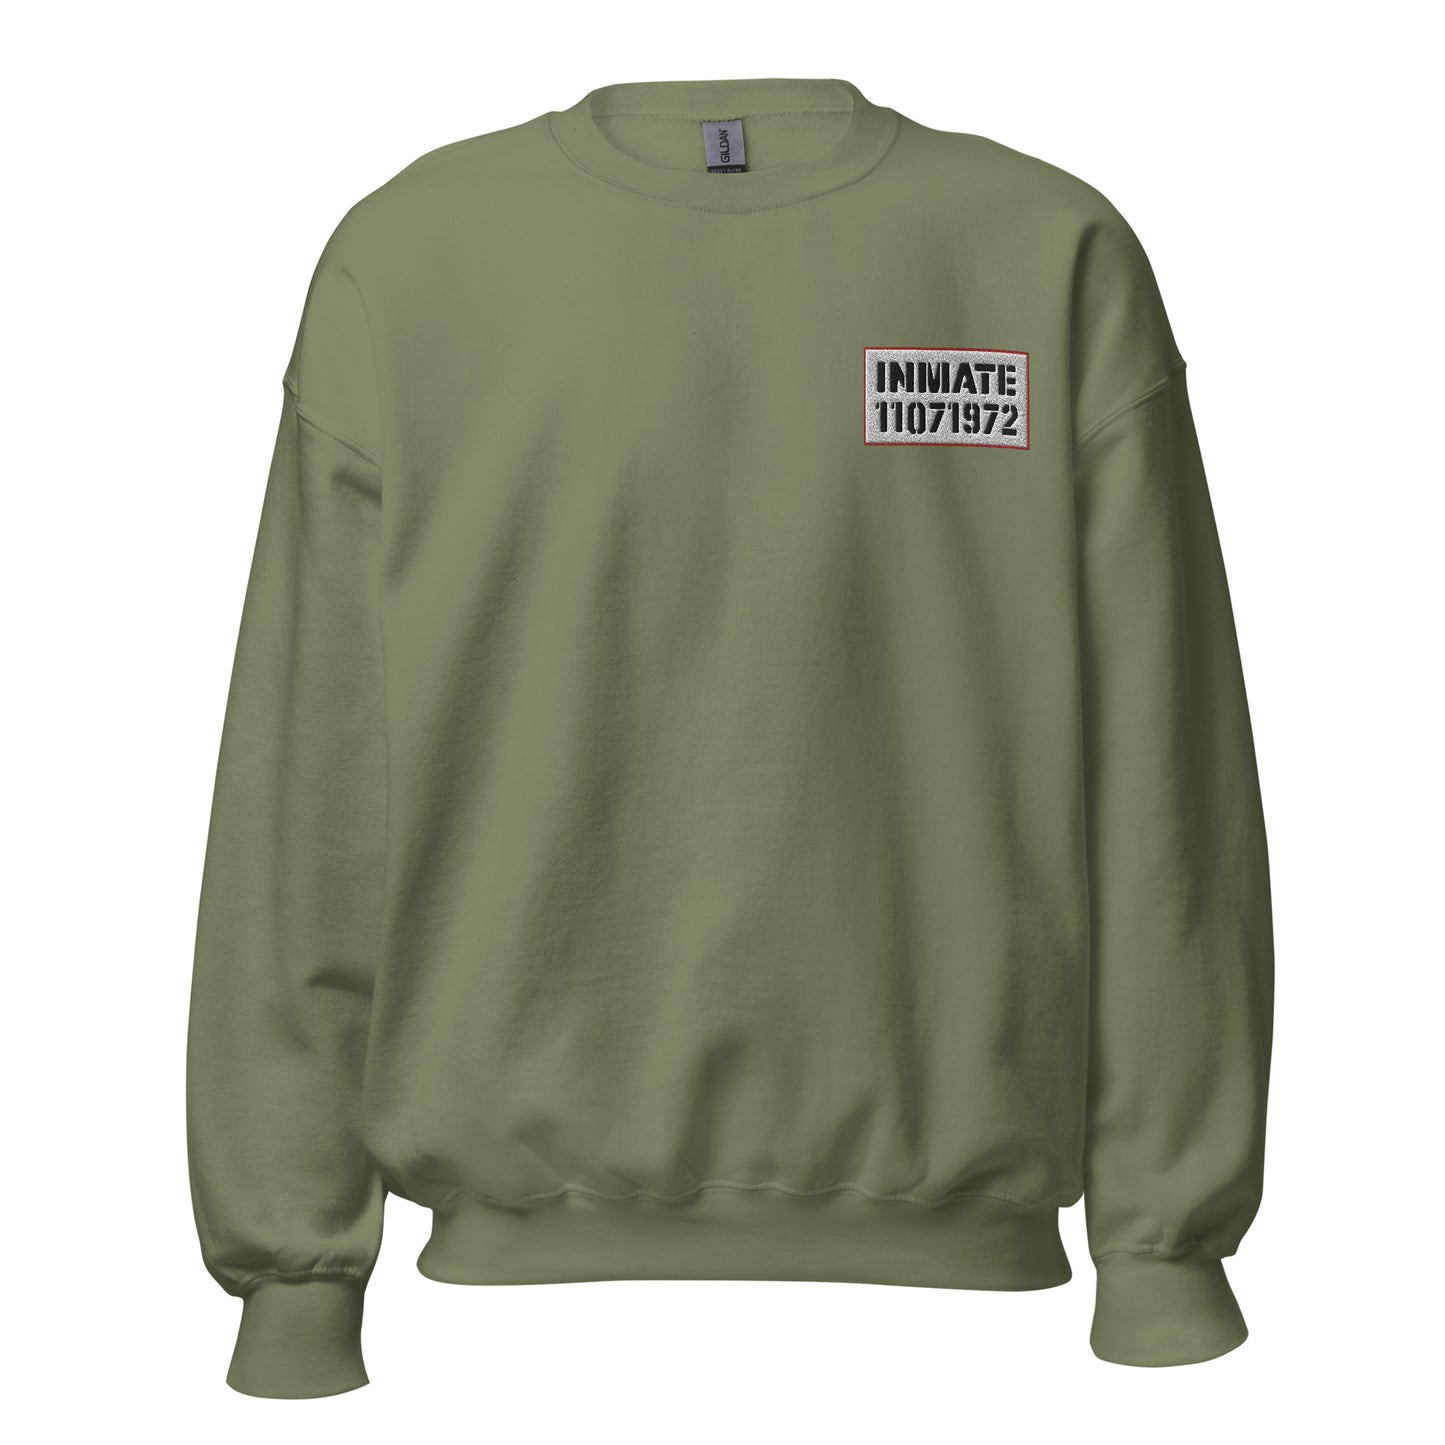 military green crewneck sweatshirt with 'Inmate' and an inmate number embroidered on left chest.